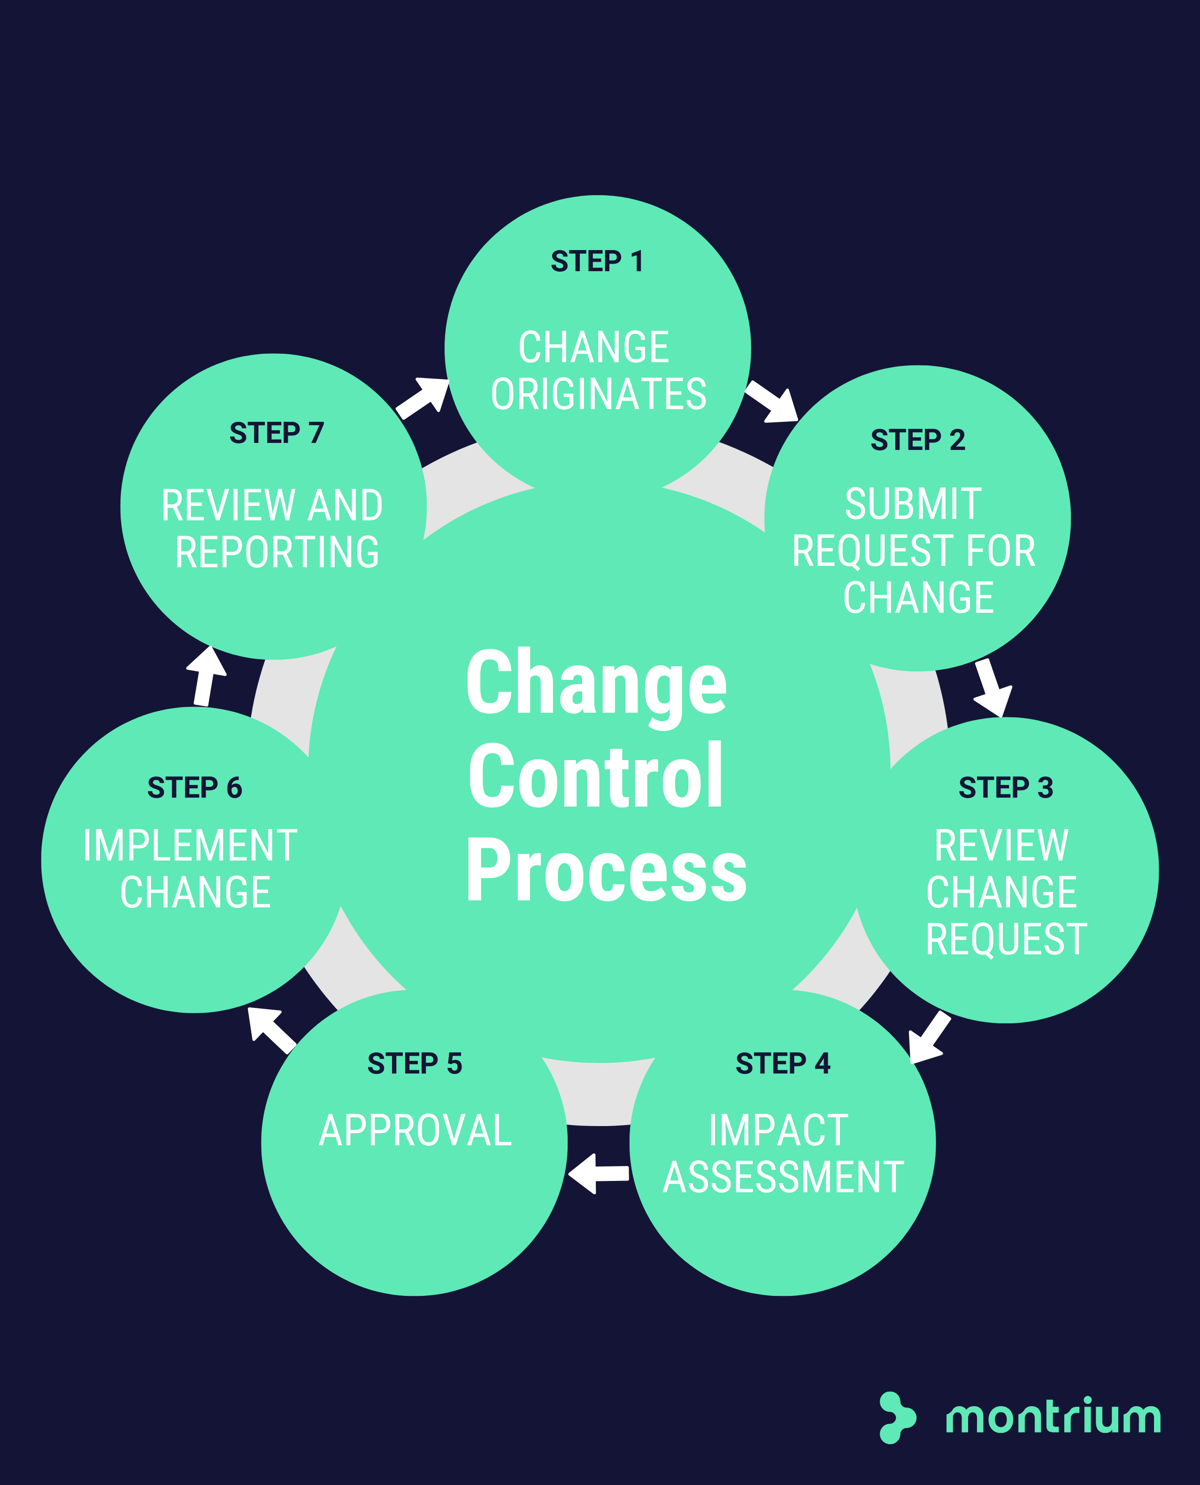 The secret to managing change control in pharma like a pro